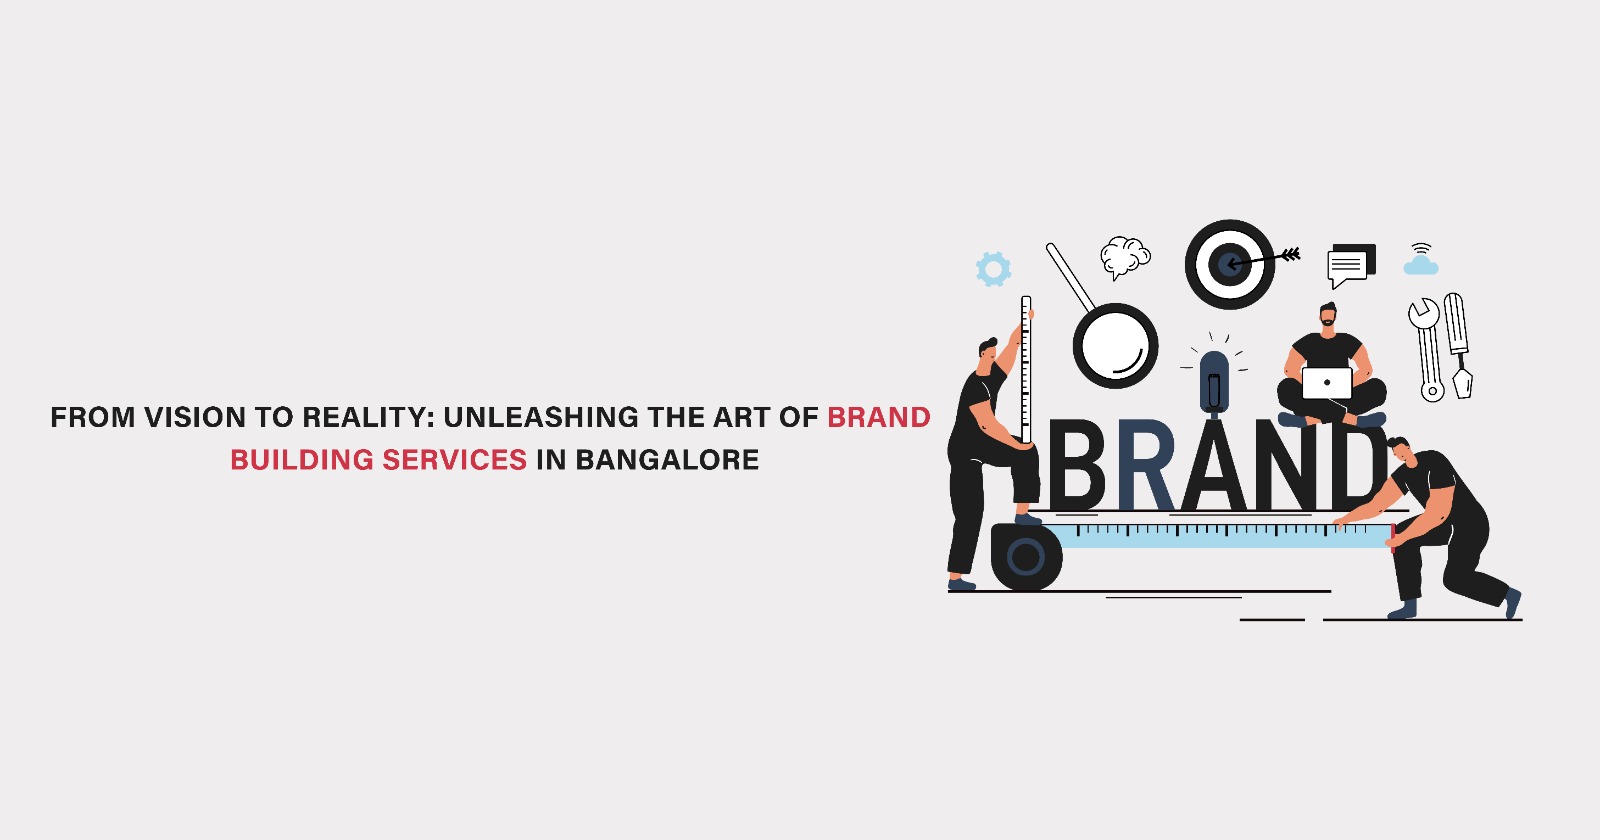 The art of brand building services in Bangalore